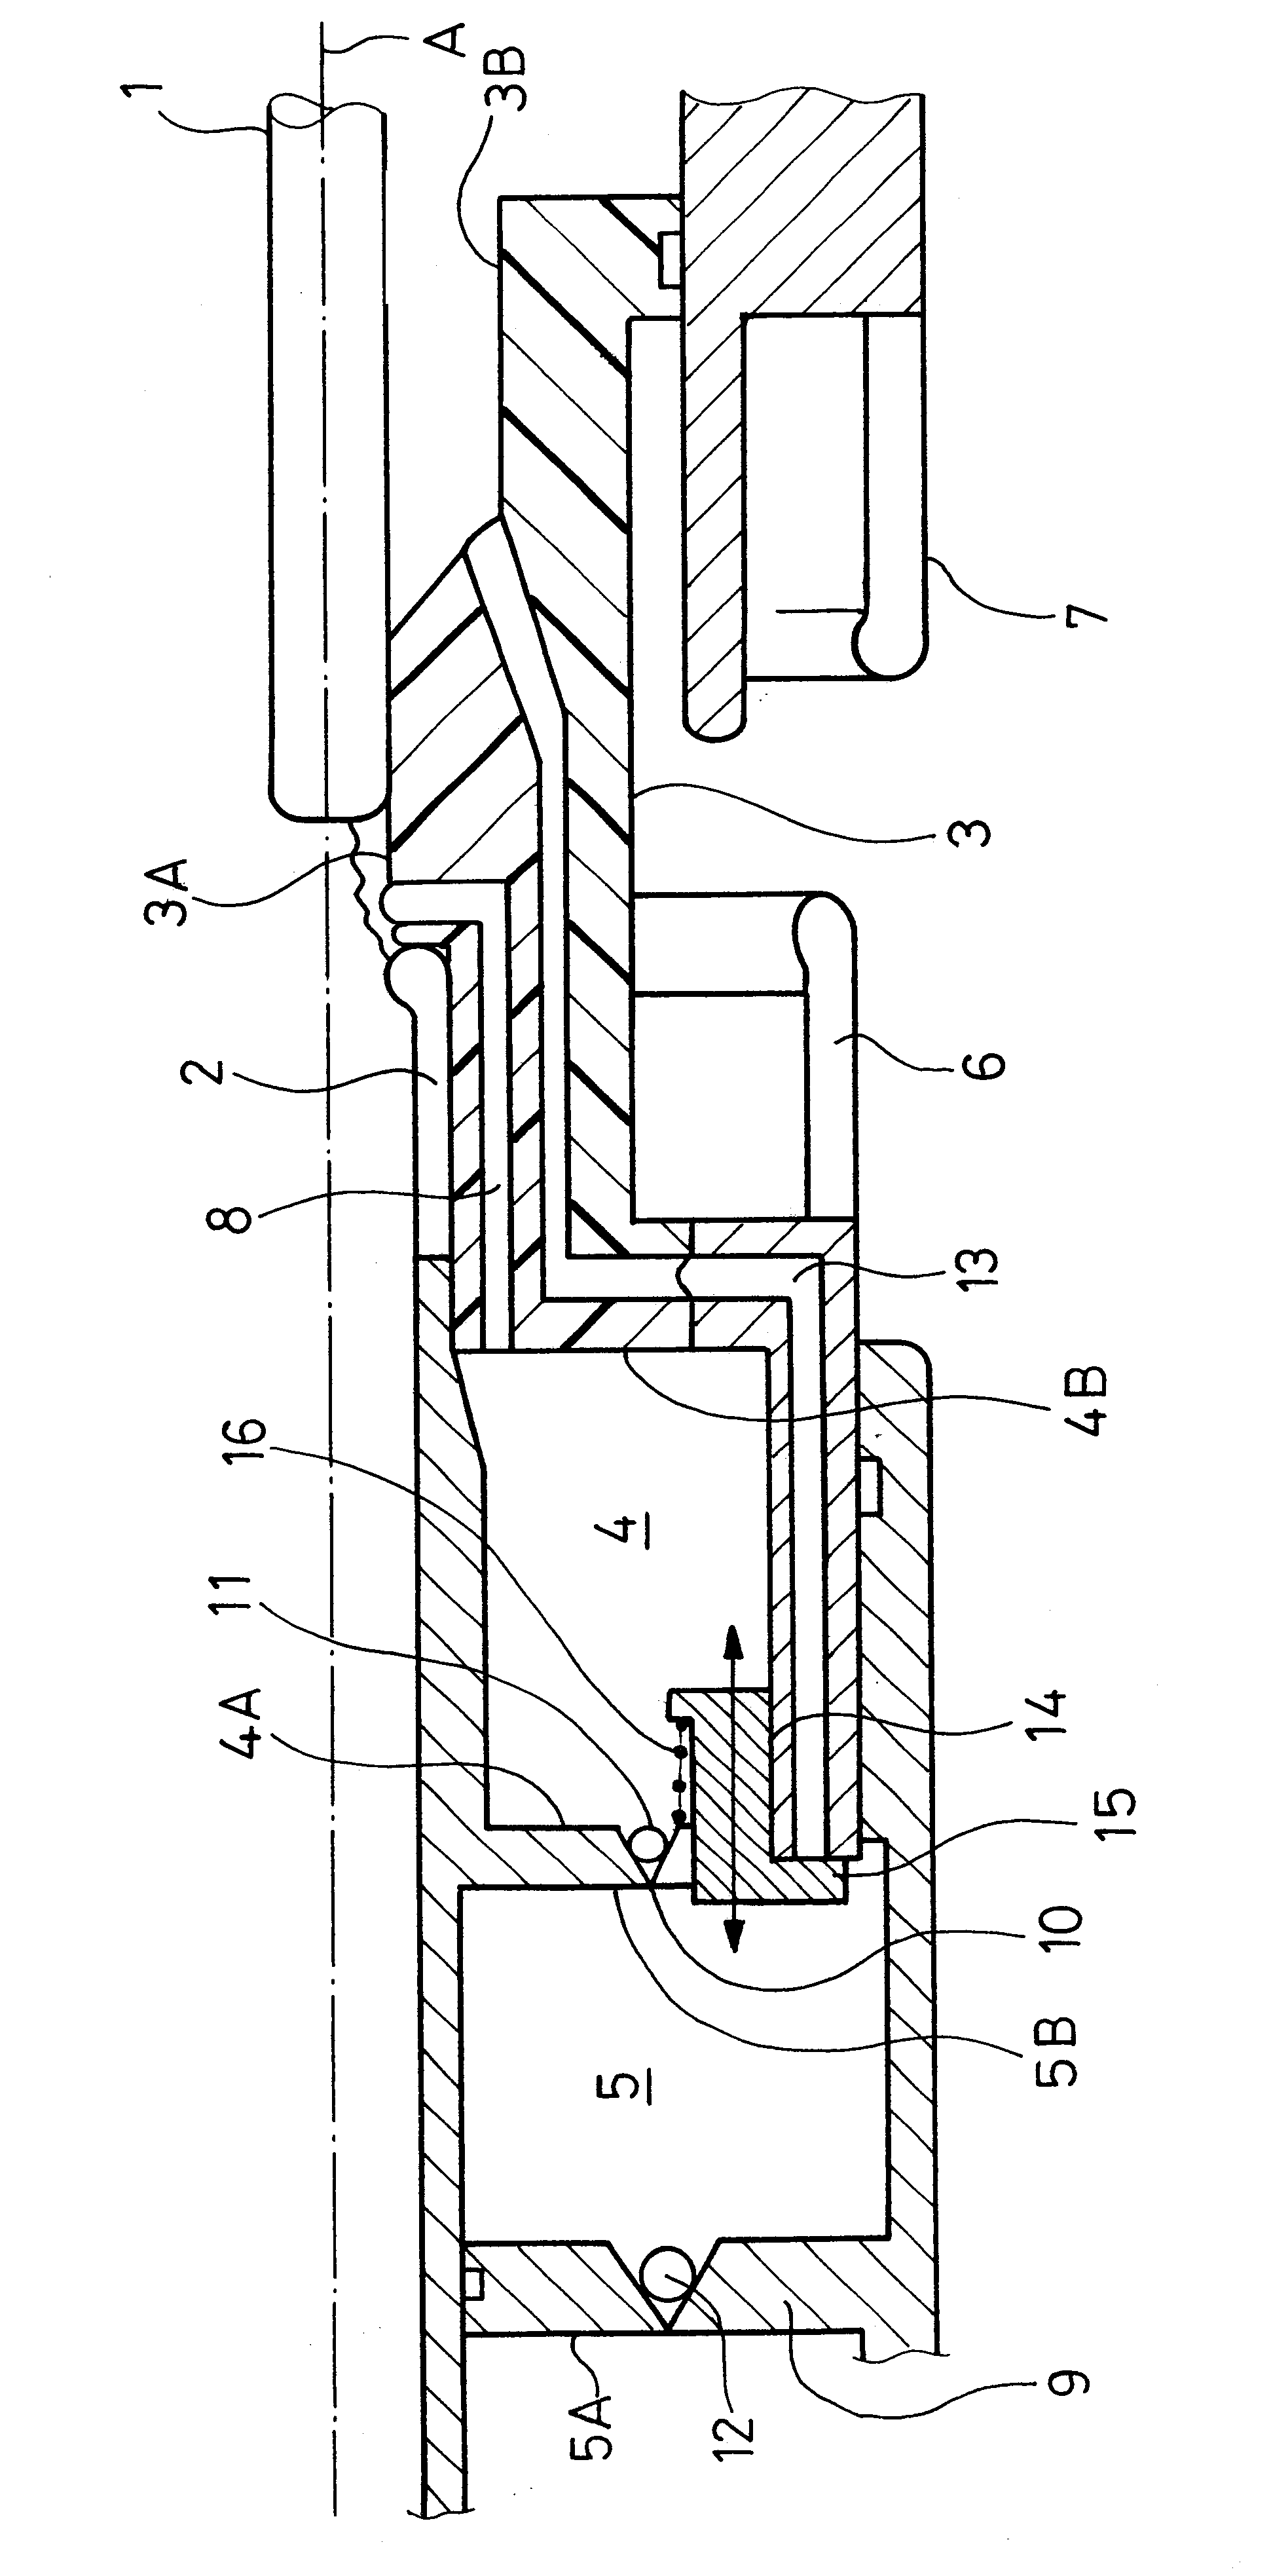 Circuit-breaker including a channel for emptying the piston-driven compression chamber